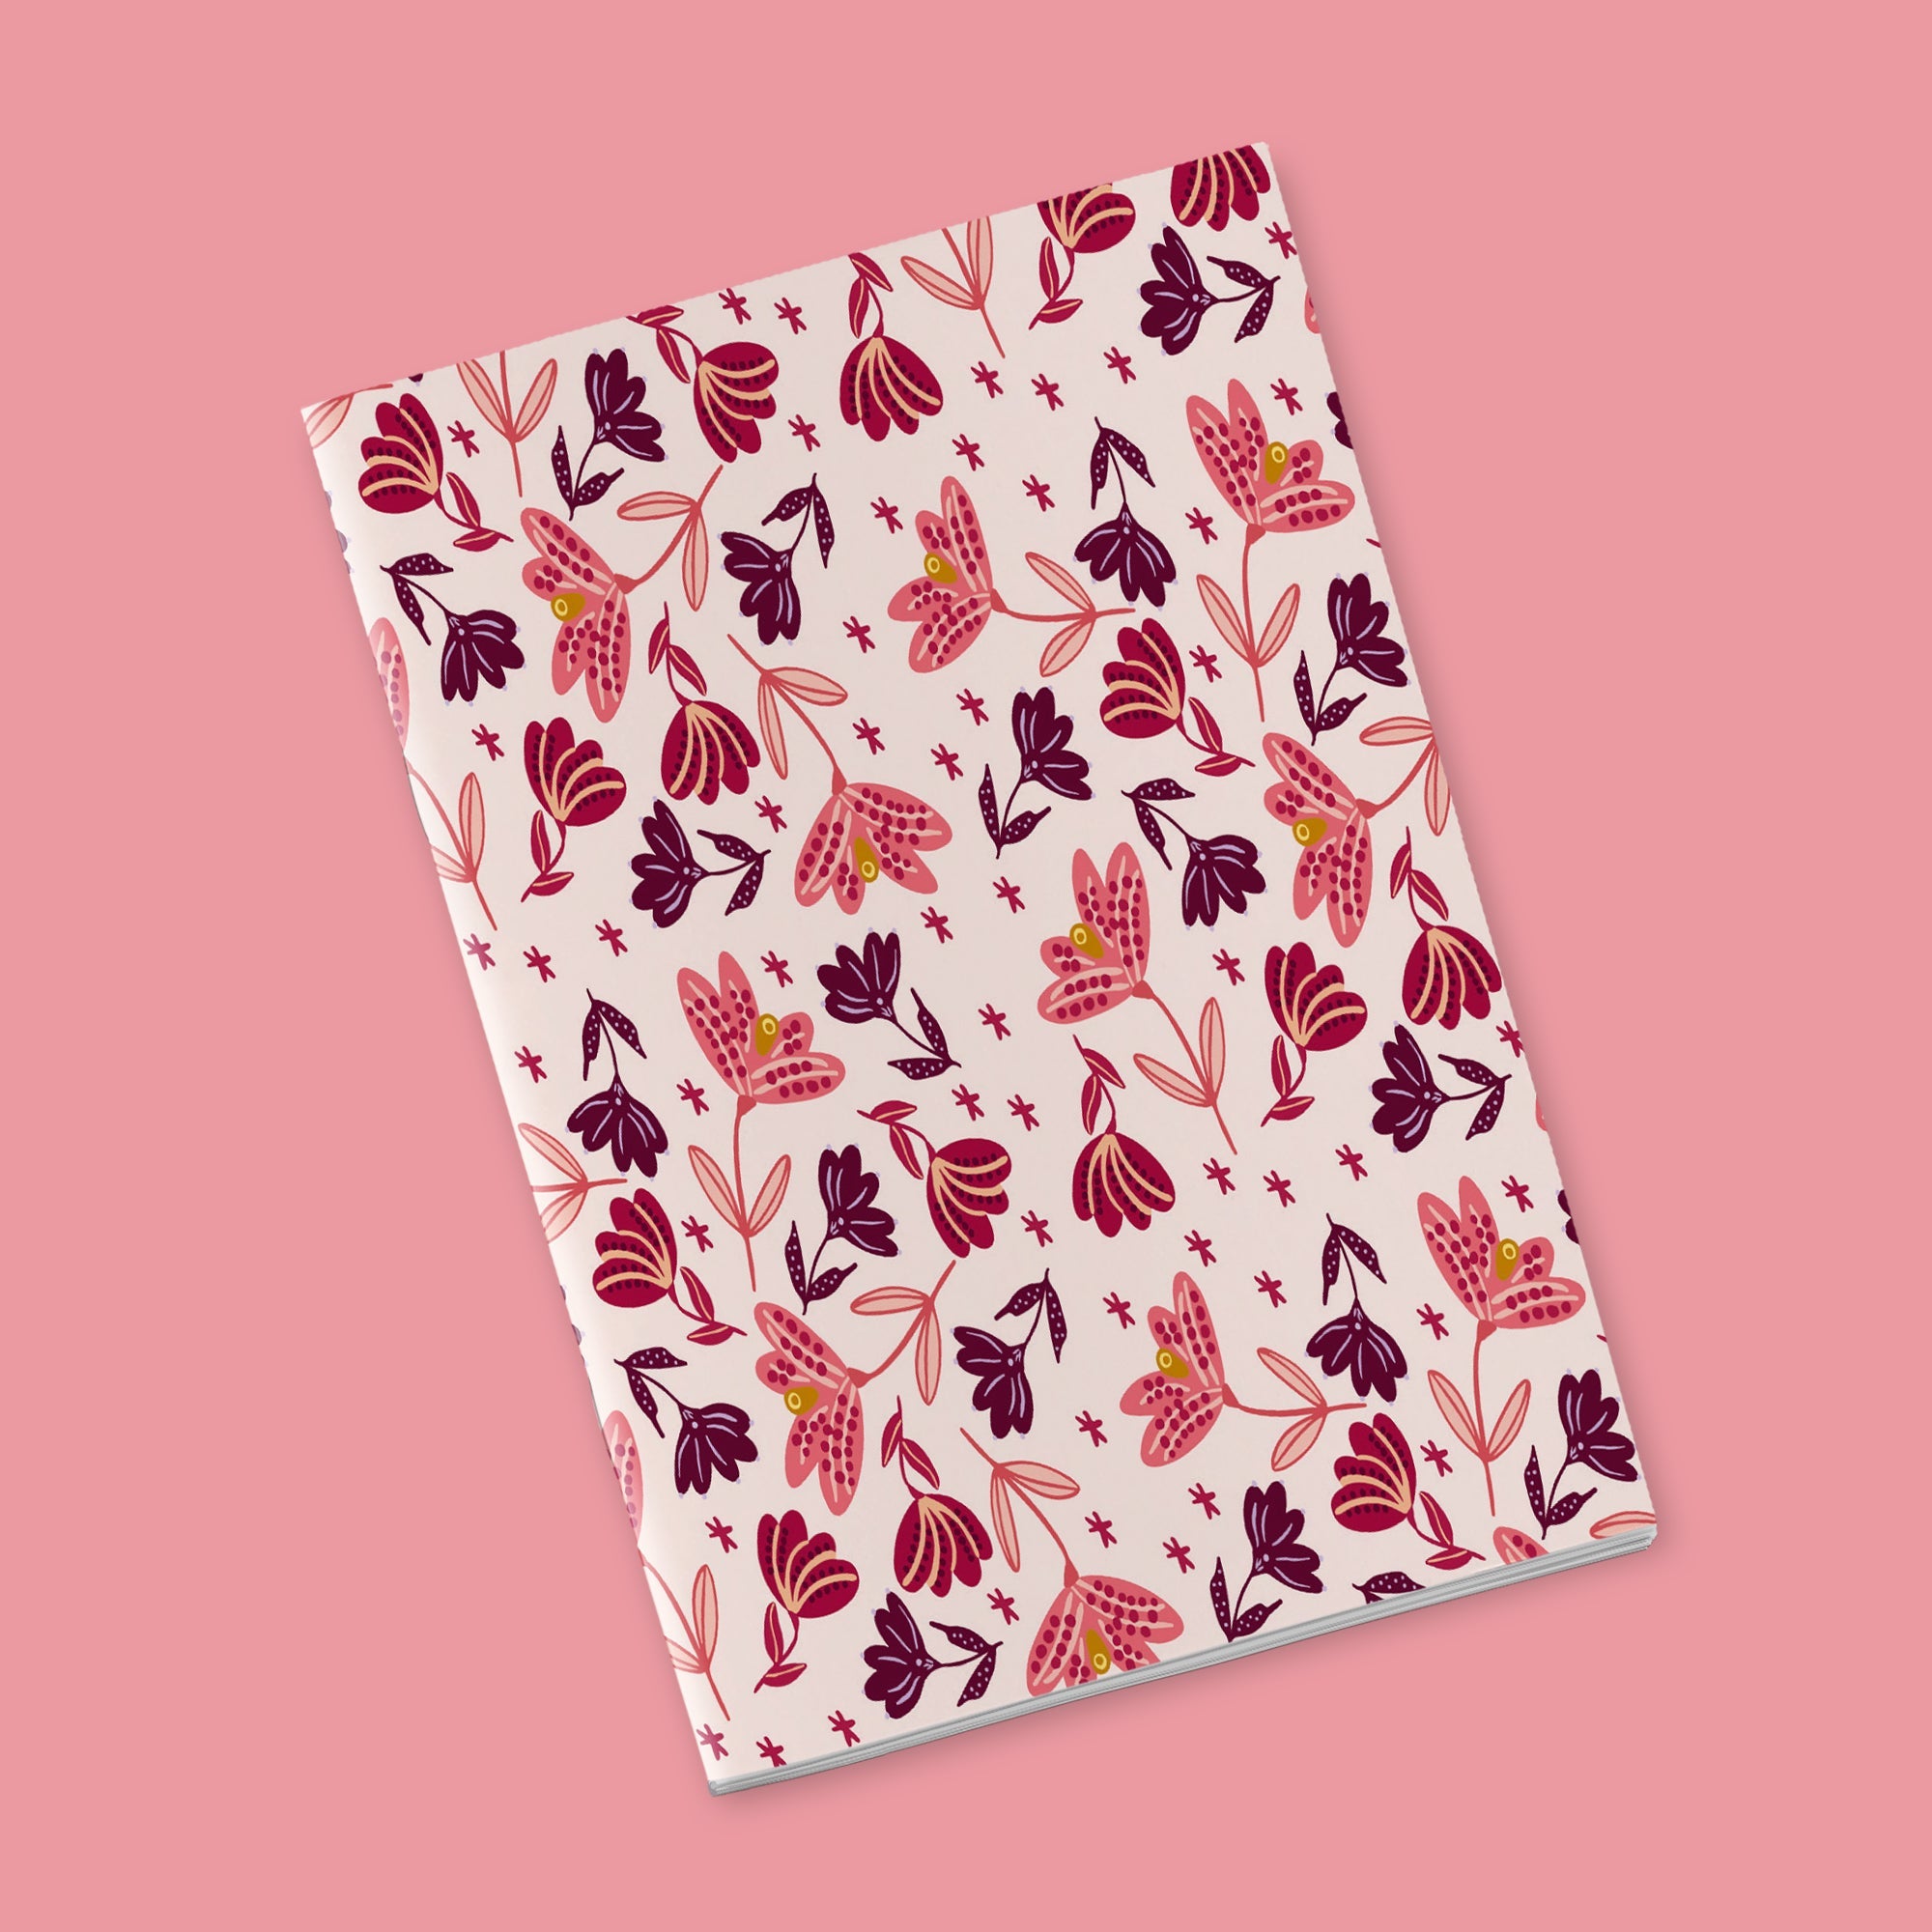 Once upon a time there was autumn - flowers on baby pink background